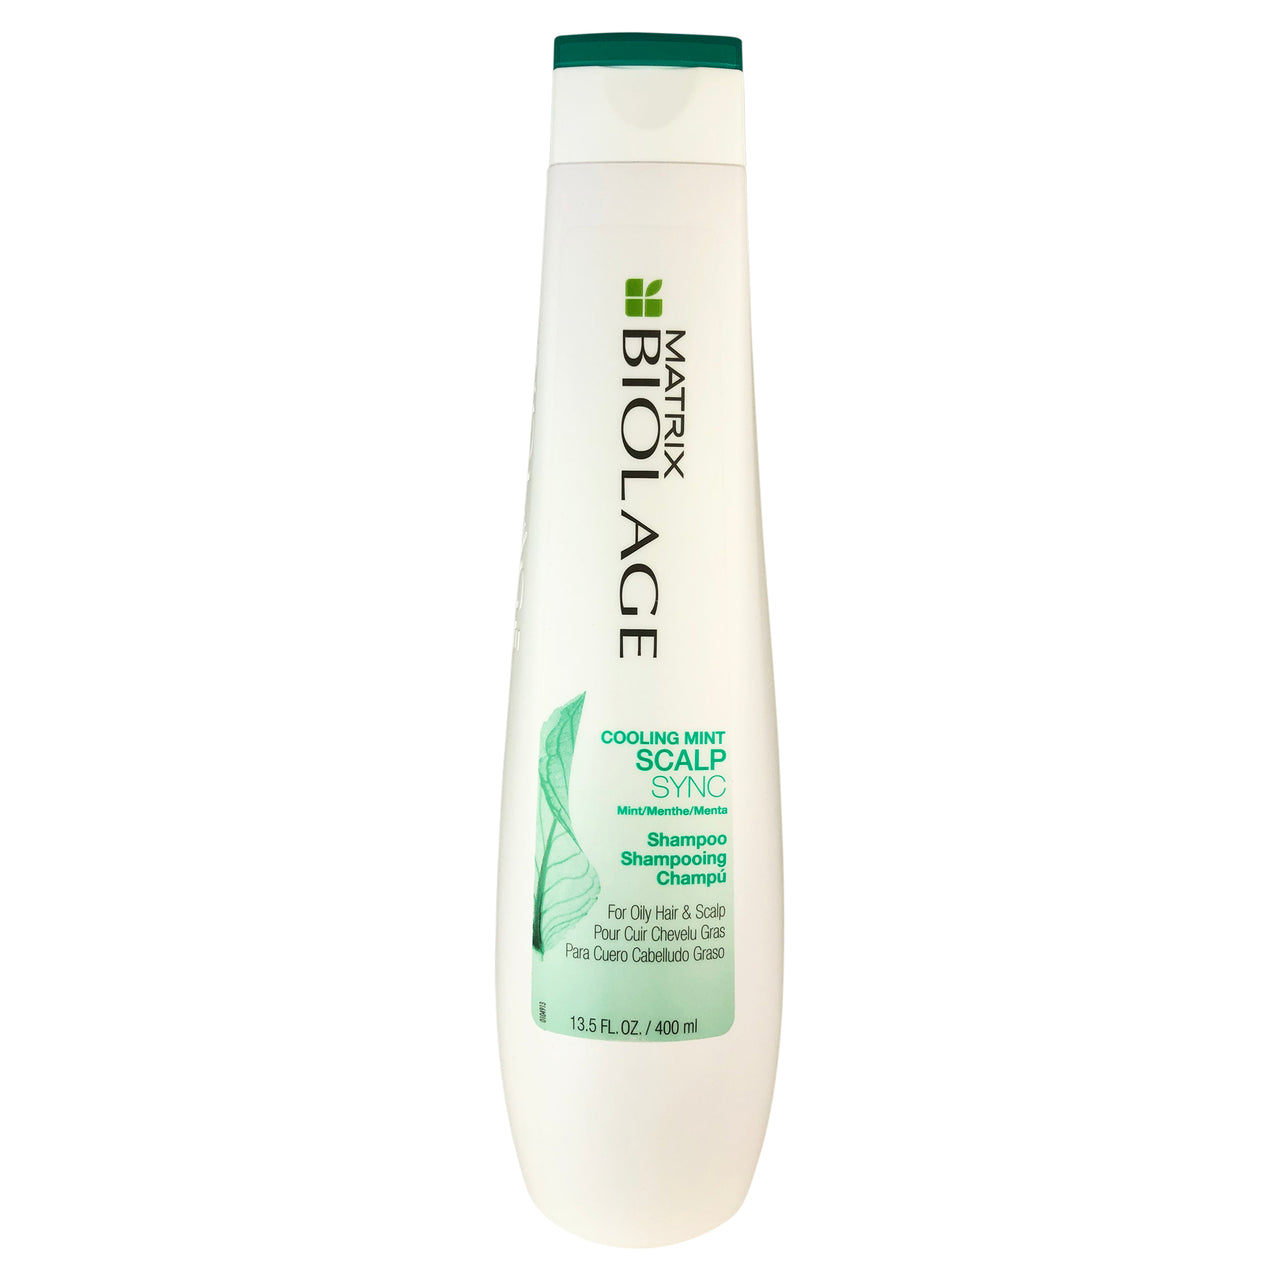 Matrix Biolage Cooling Mint Scalp Shampoo For Oily Hair And Scalp 13.5 oz